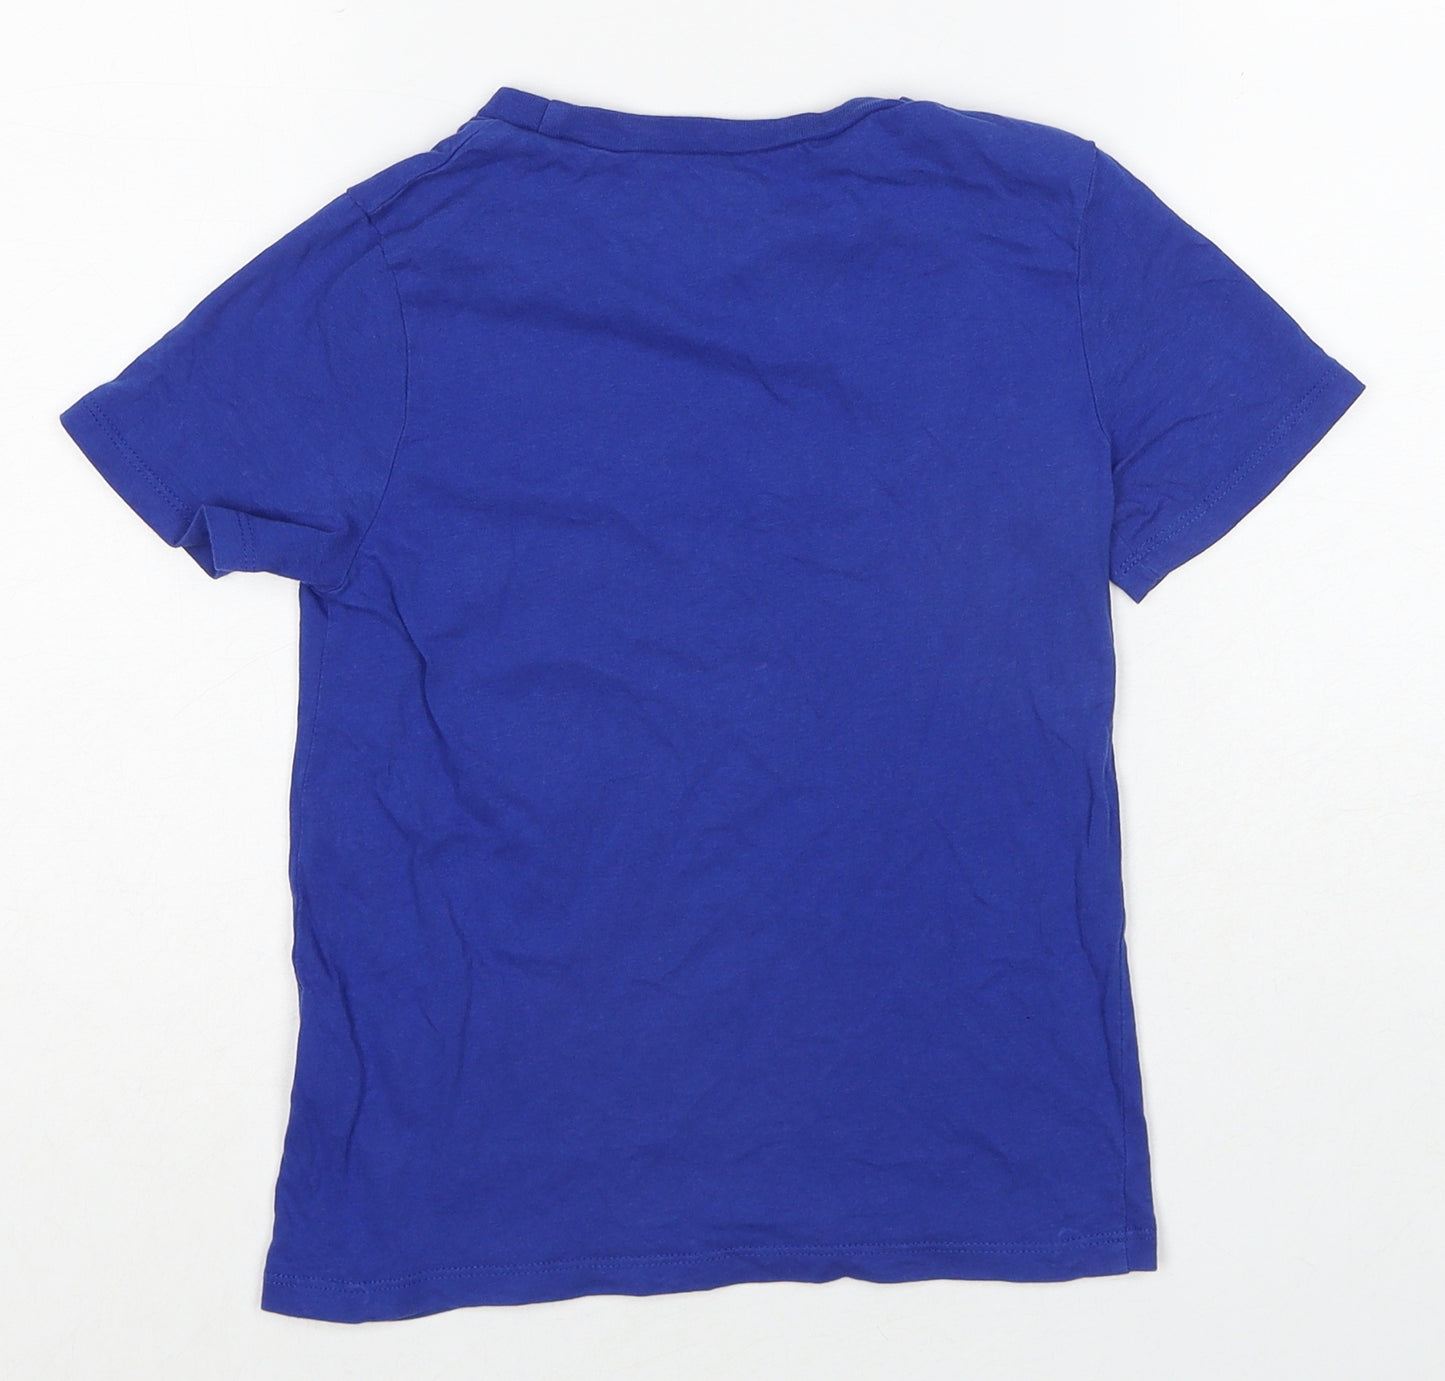 H&M Boys Blue Cotton Basic T-Shirt Size 6-7 Years Round Neck Pullover - Size 6-8 Years NASA